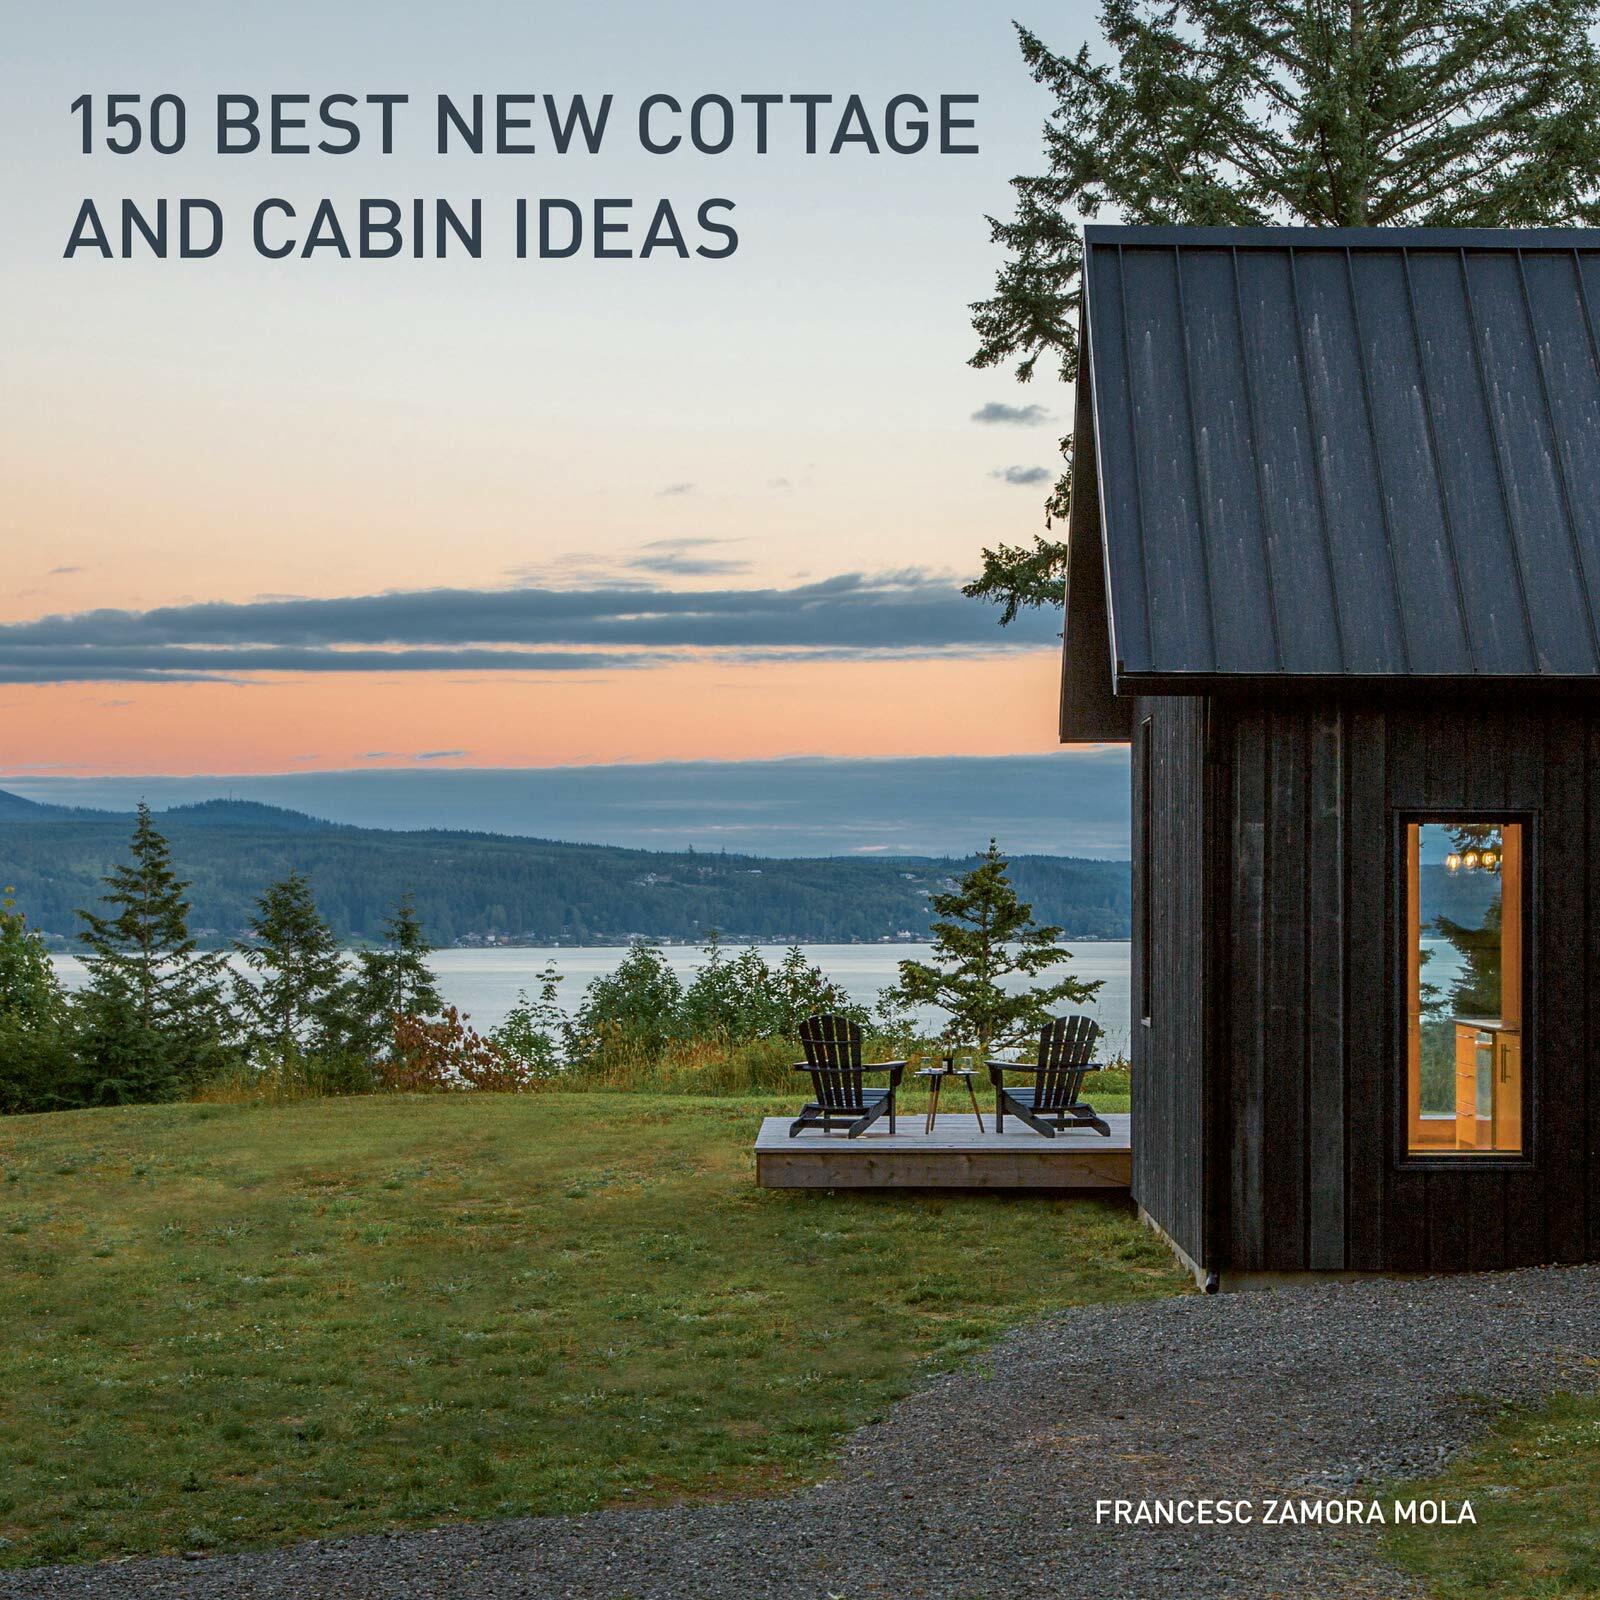 150 Best New Cottage and Cabin Ideas (Hardcover)